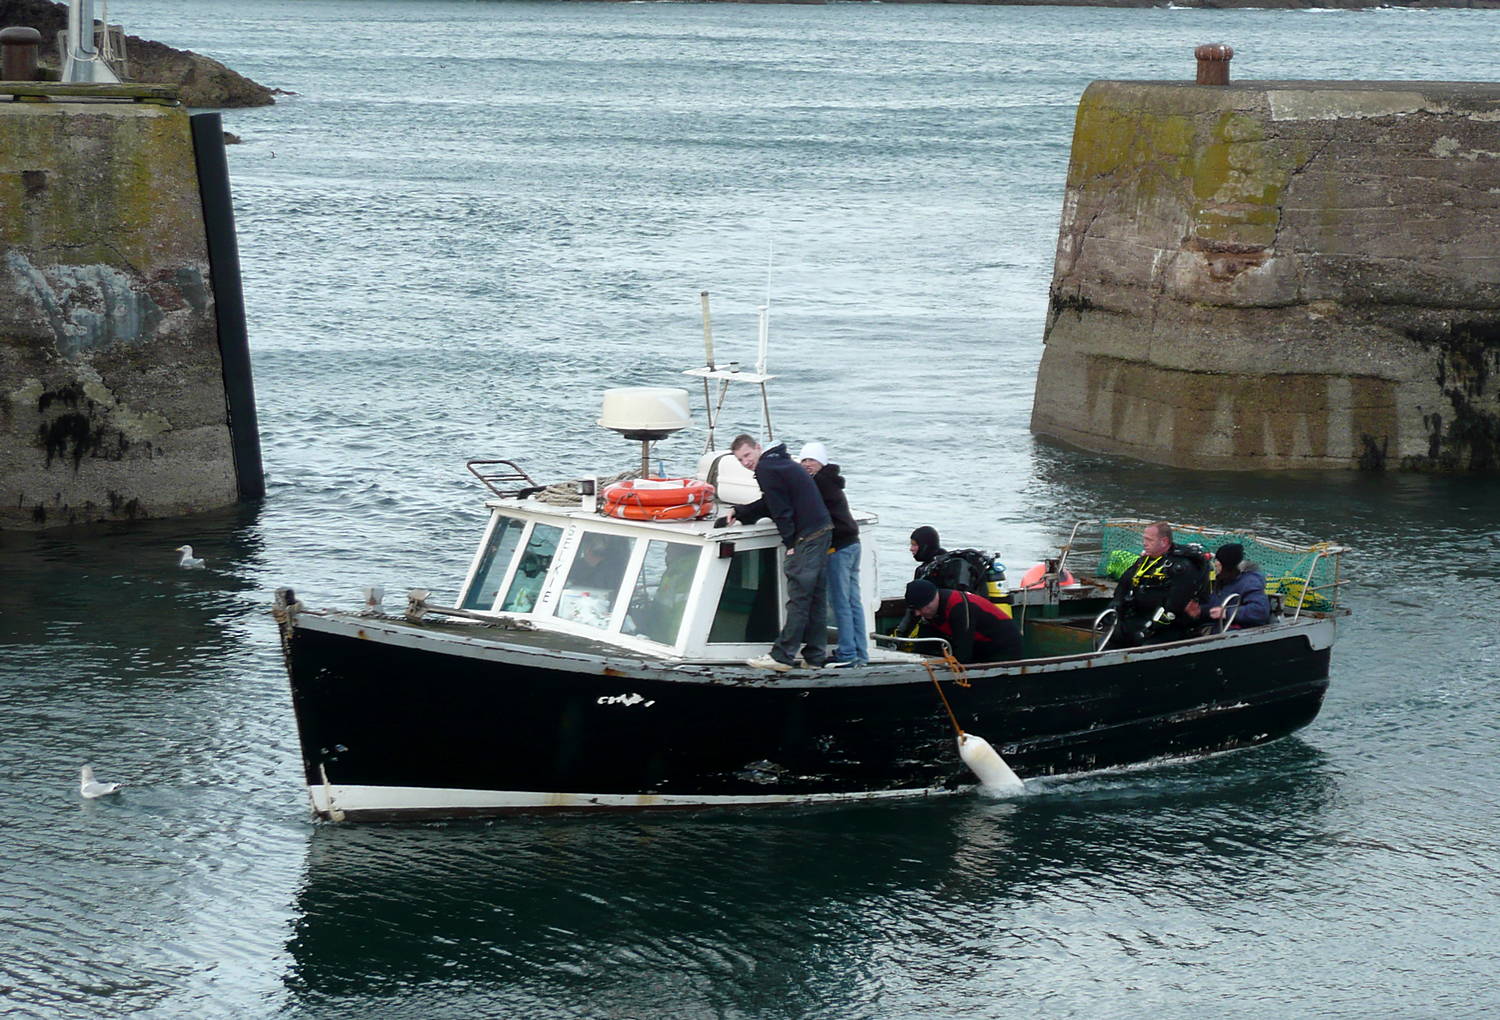 Diving group returning to harbour